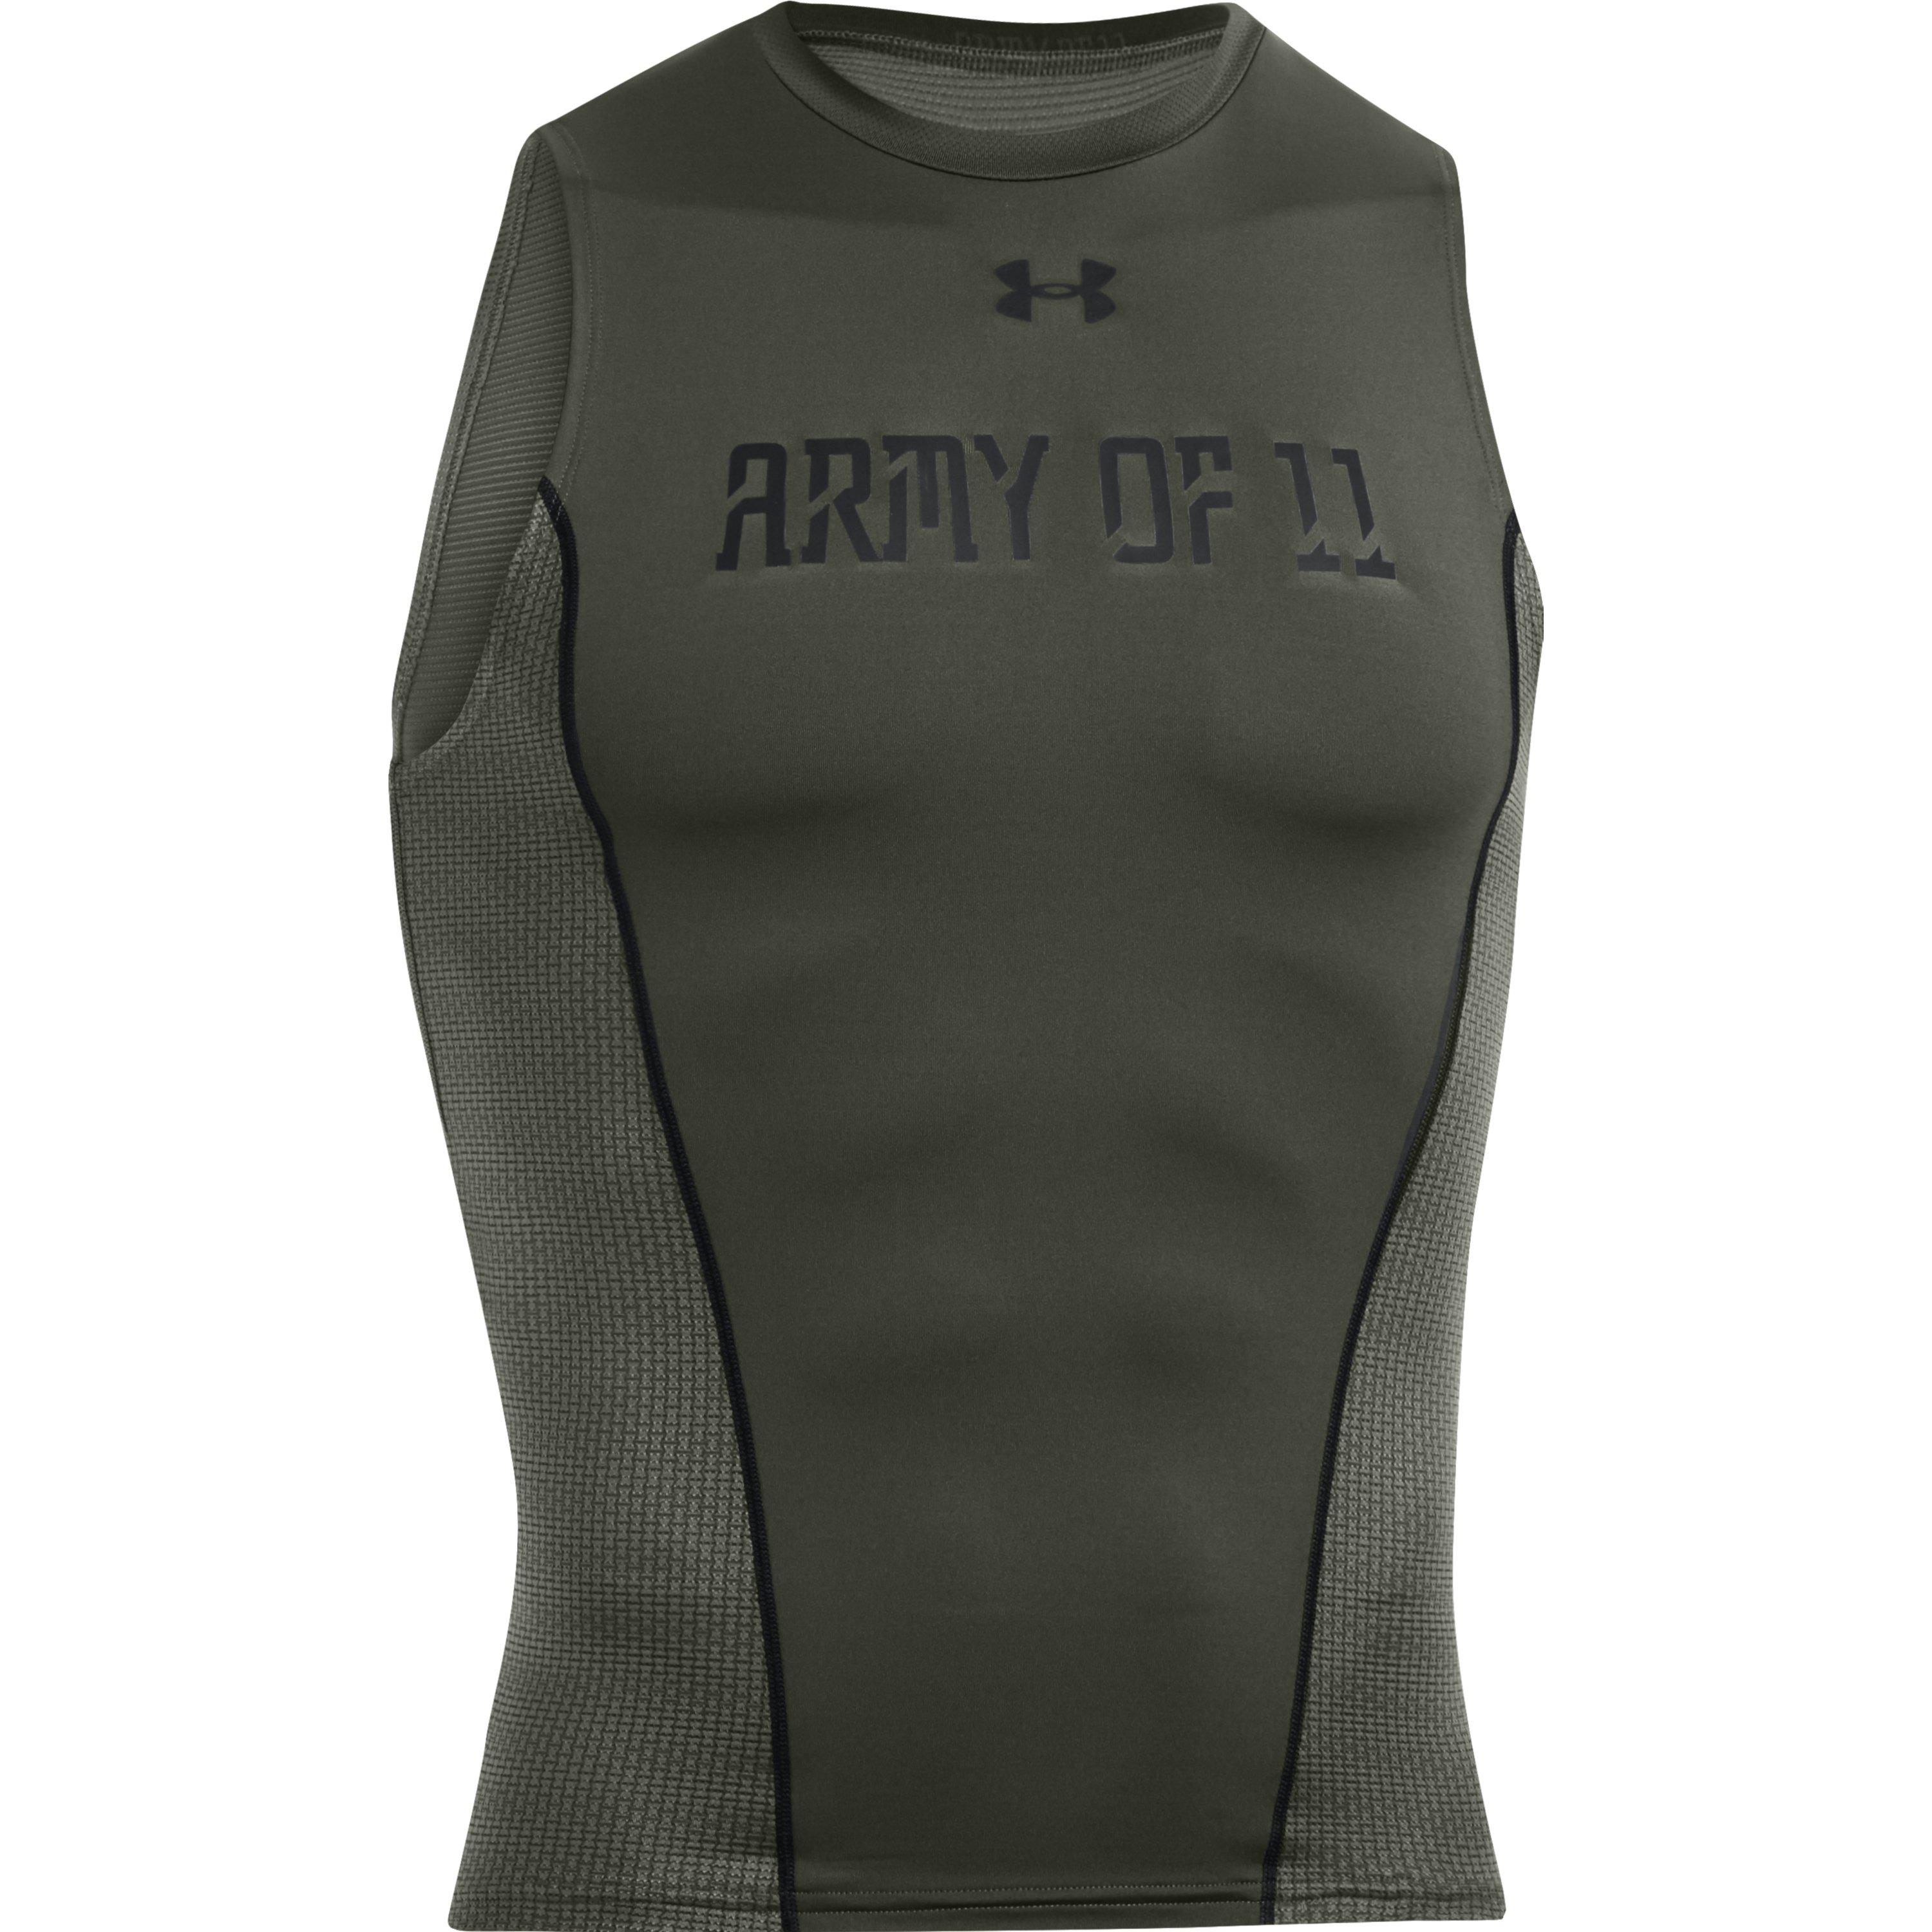 Under Armour Men's Ua Army Of 11 Compression Shirt in Green for |